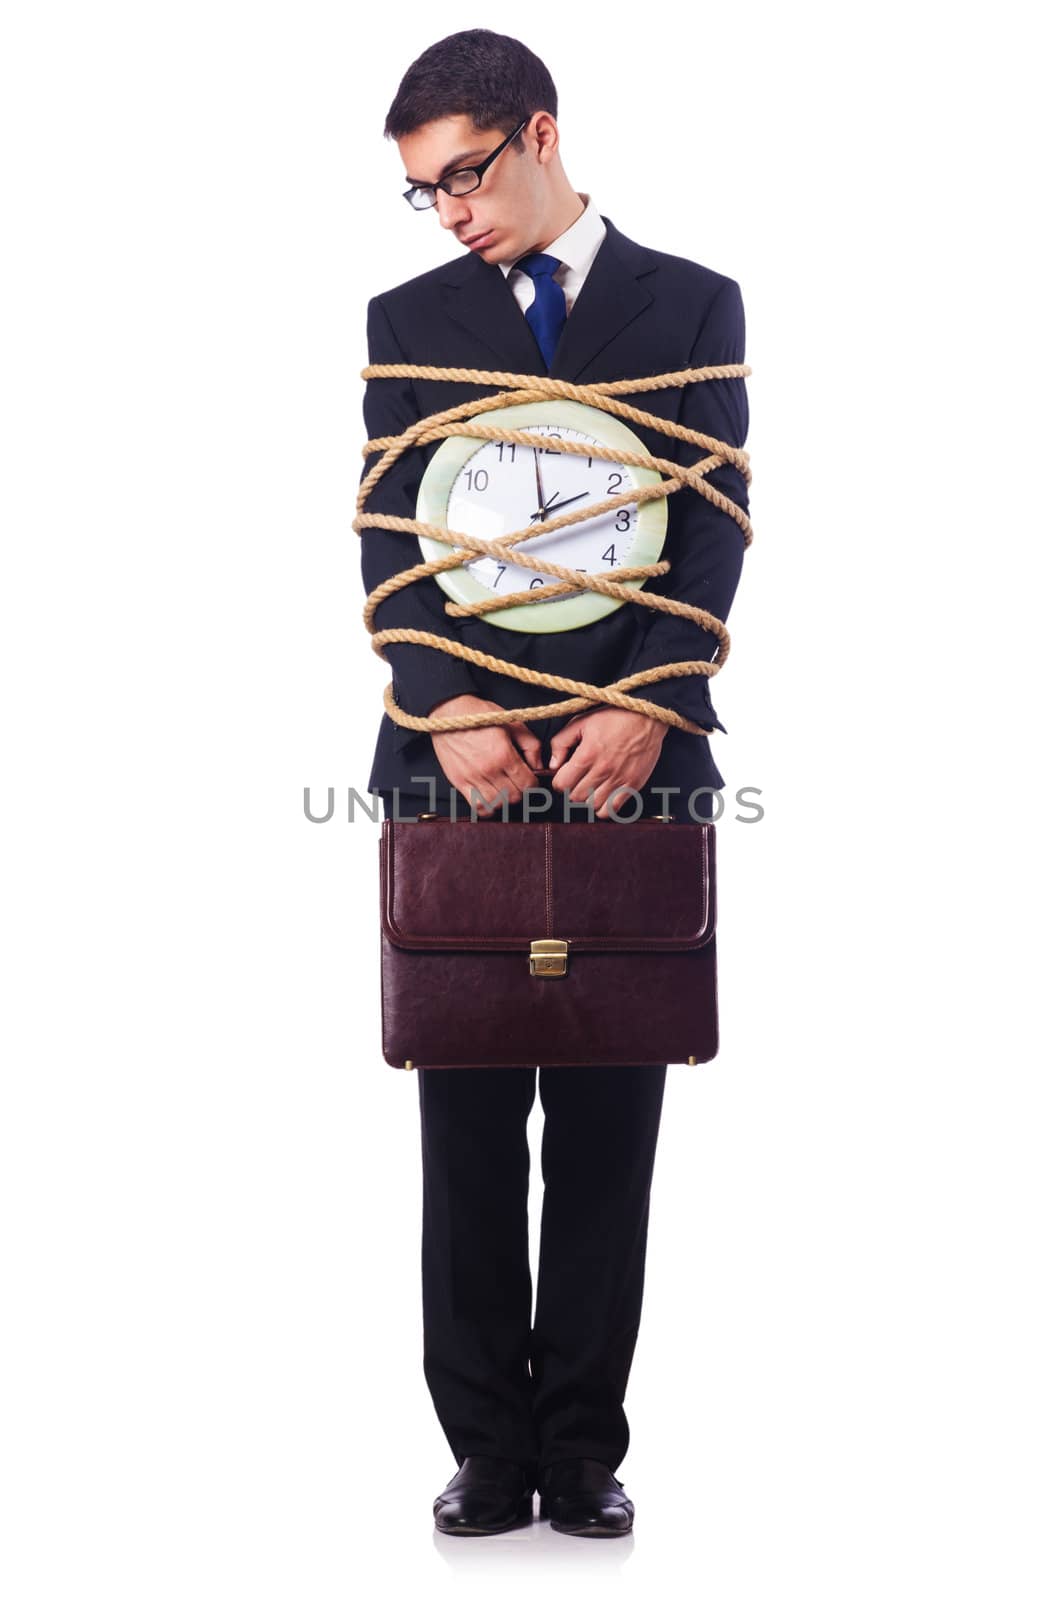 Businessman tied up with rope on white